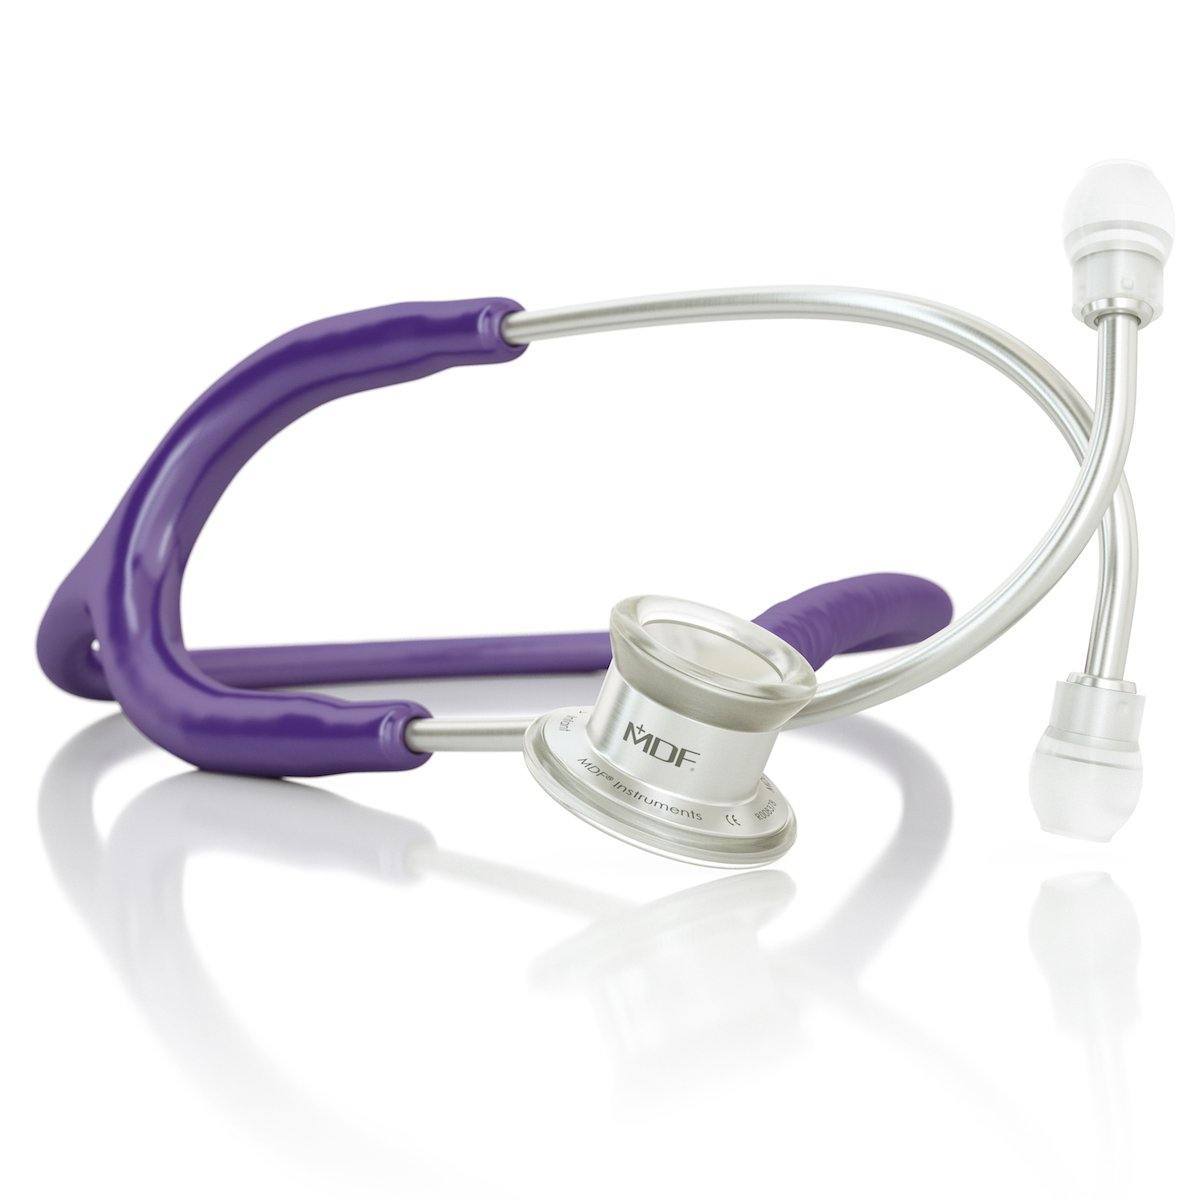 MDFå¨ MD One Infant Stainless Steel Stethoscope - Silver - Purple